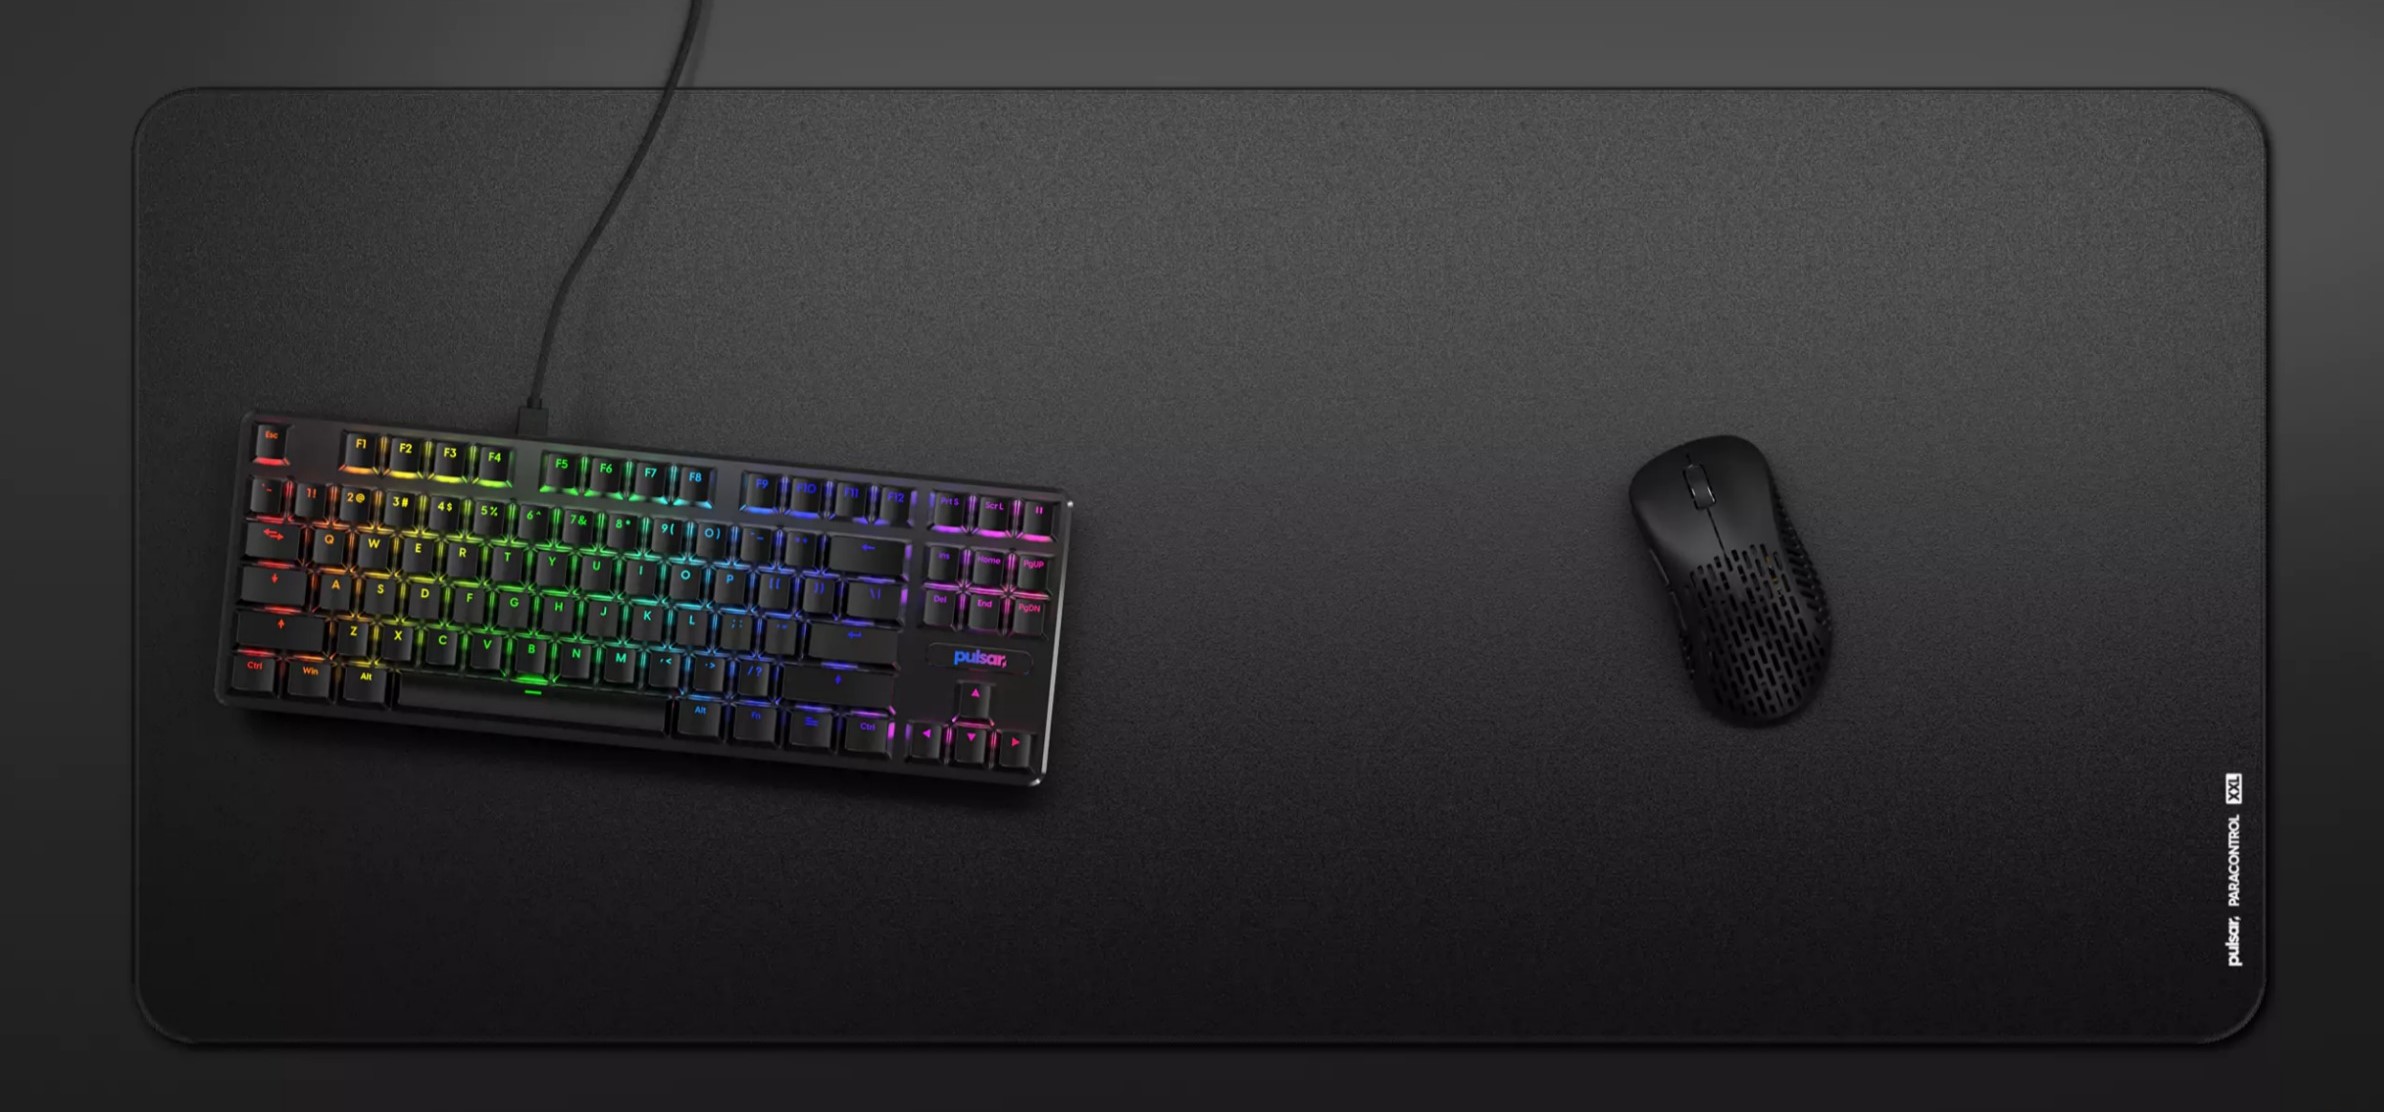 A large marketing image providing additional information about the product Pulsar Paracontrol V2 Mousepad Two XL - Black - Additional alt info not provided